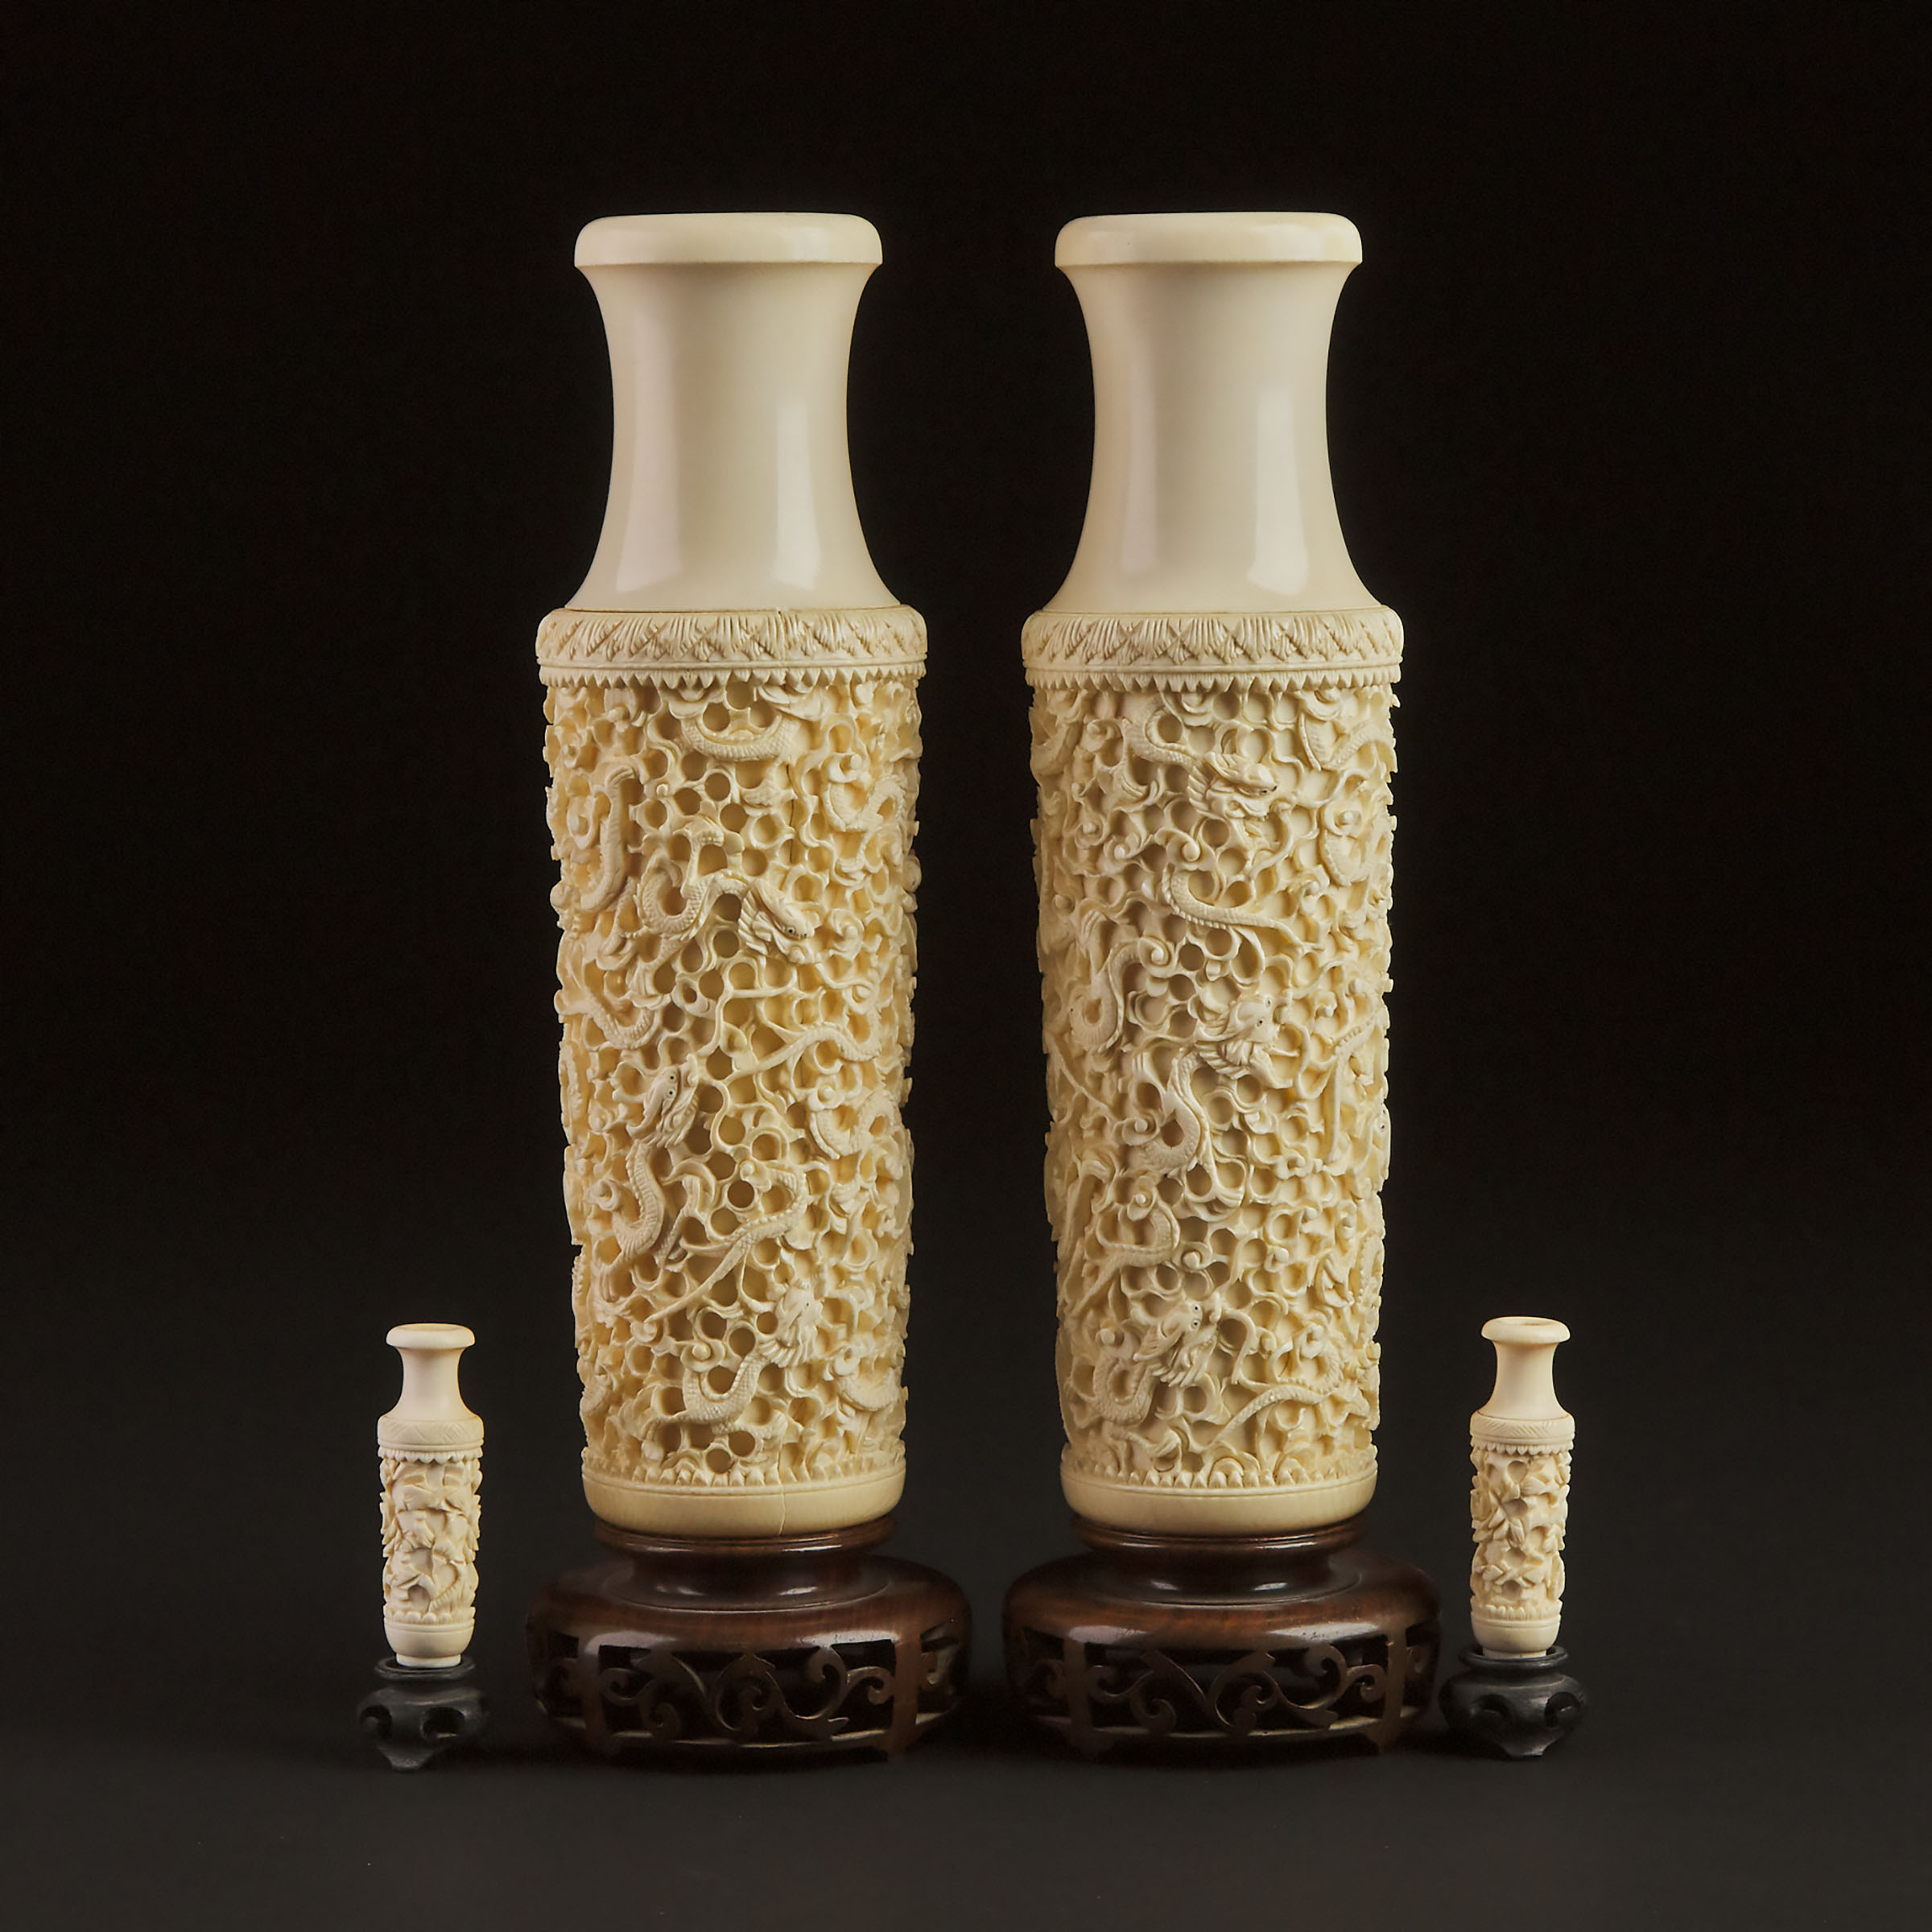 A Pair of Carved Ivory 'Dragon' Vases, Together With a Pair of Miniature Vases, Early to Mid 20th Century